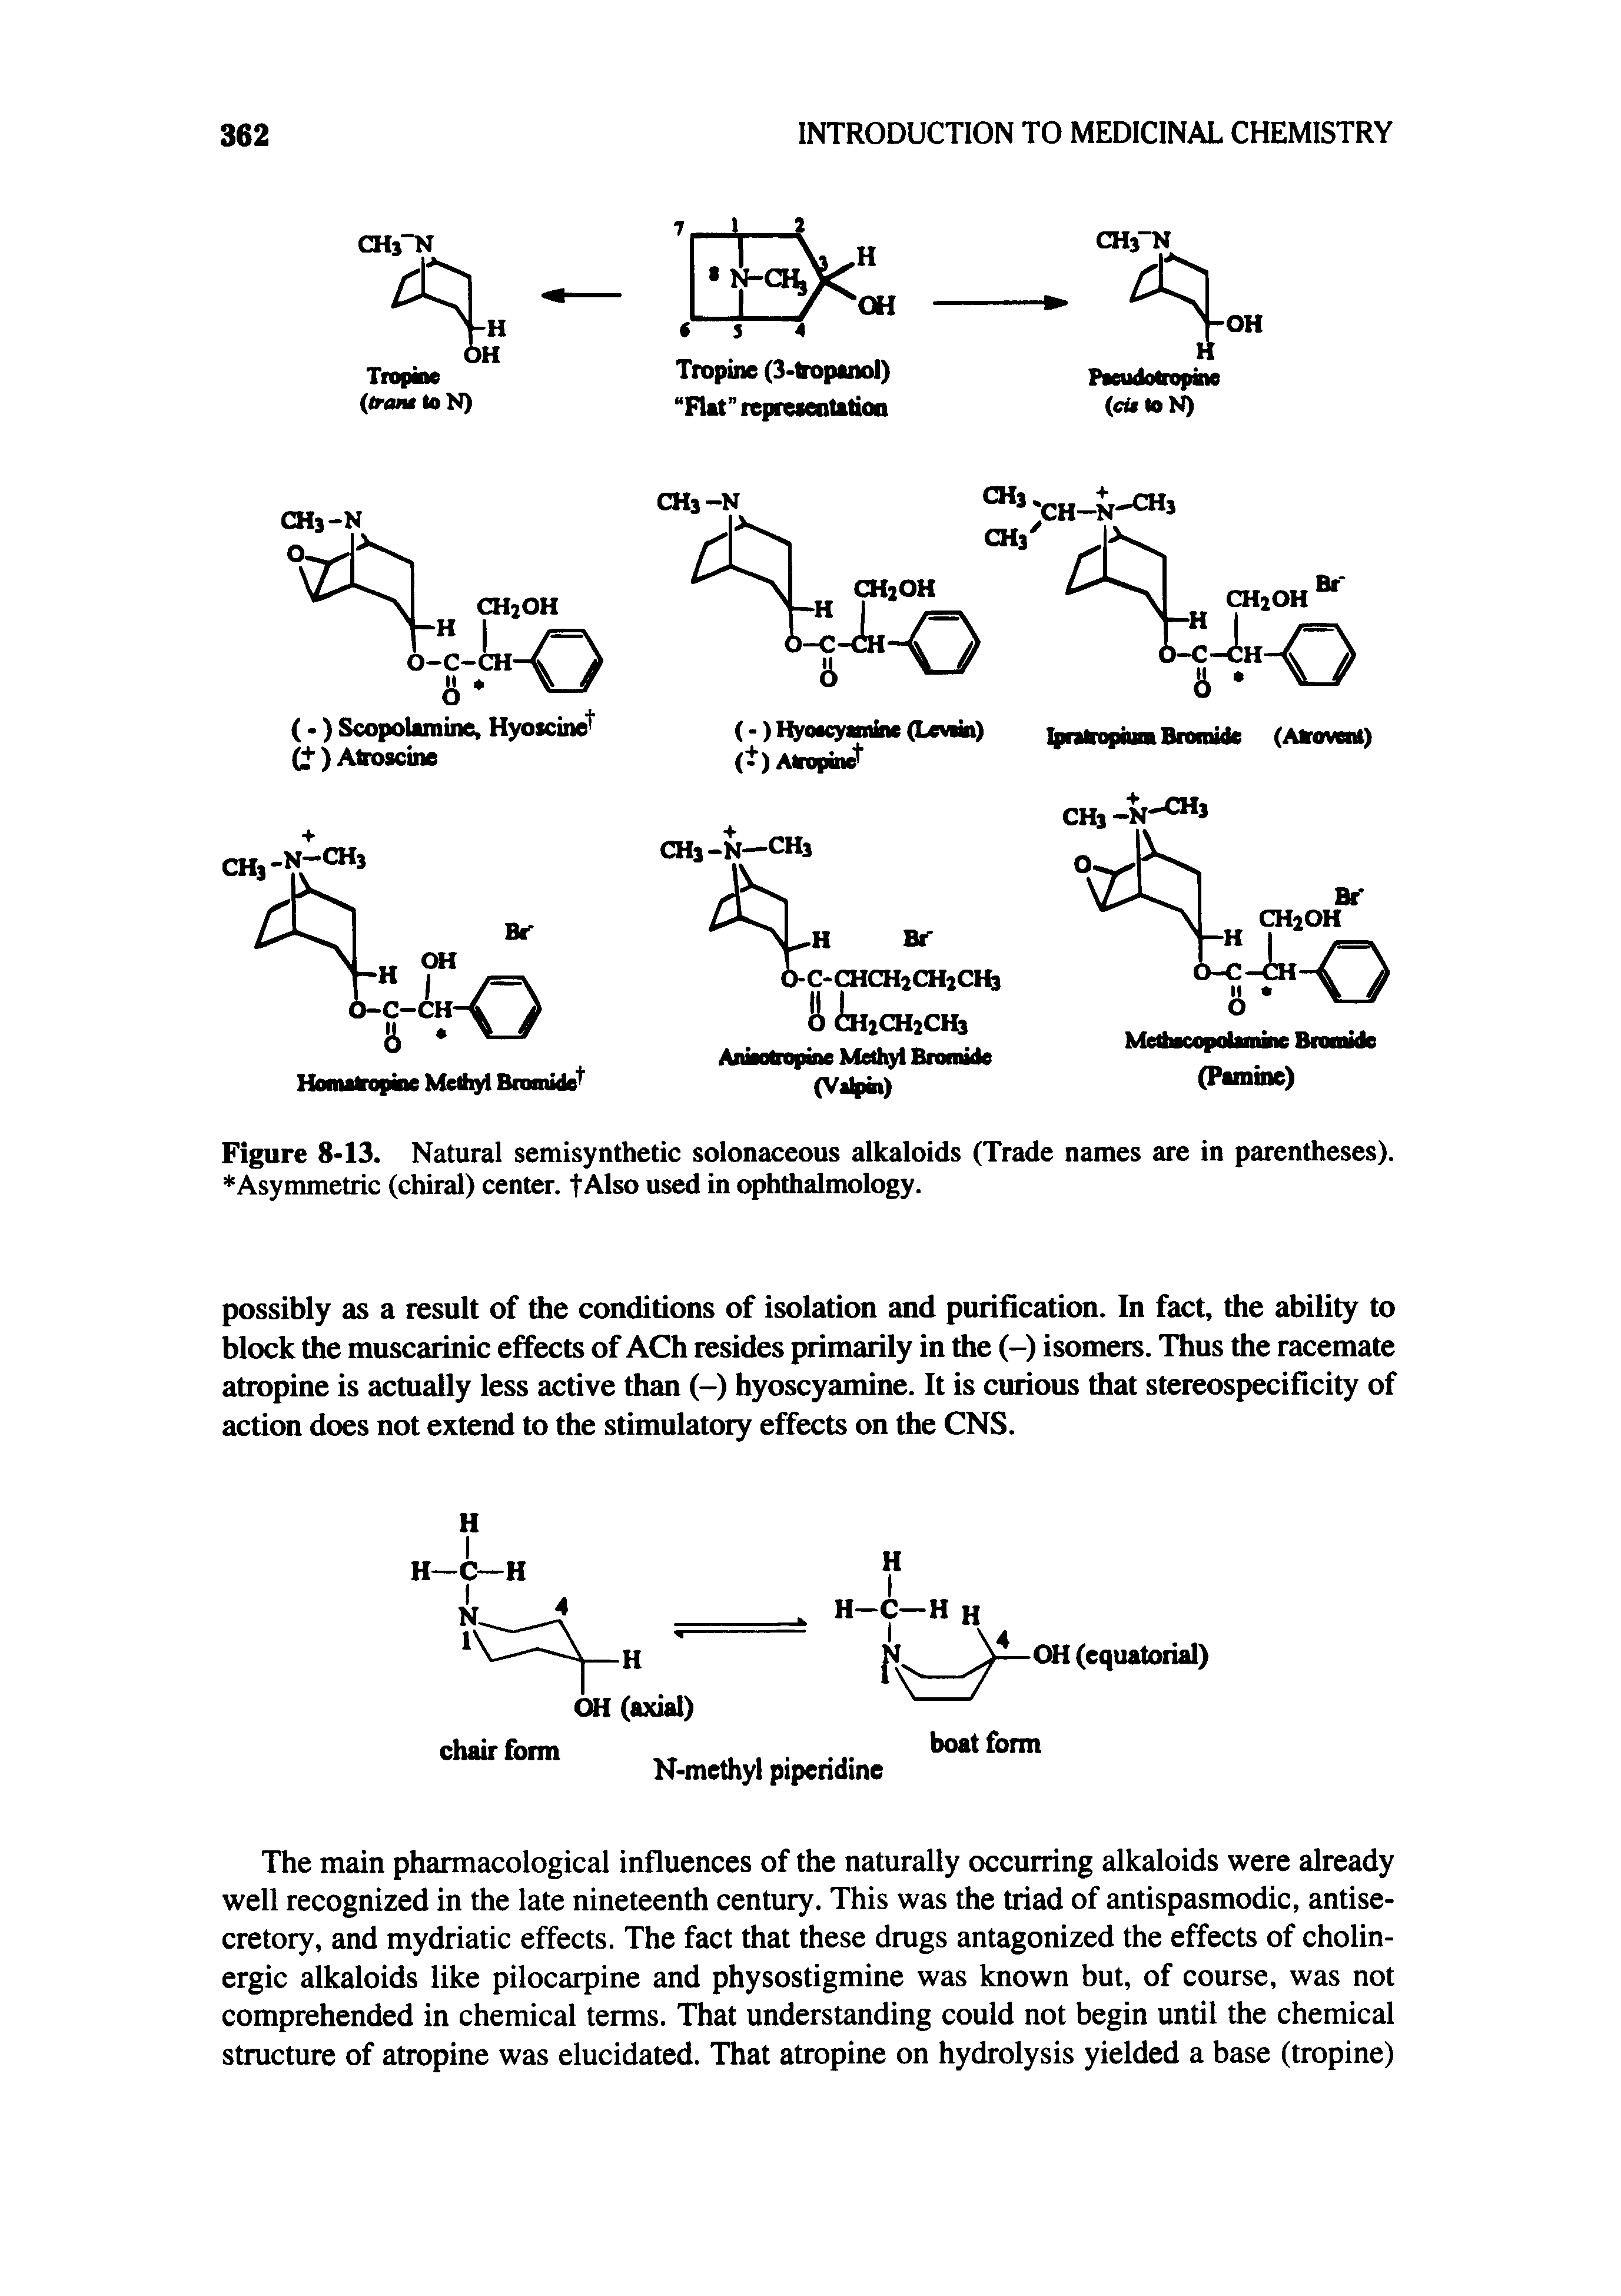 Figure 8-13. Natural semisynthetic solonaceous alkaloids (Trade names are in parentheses). Asymmetric (chiral) center, tAlso used in ophthalmology.